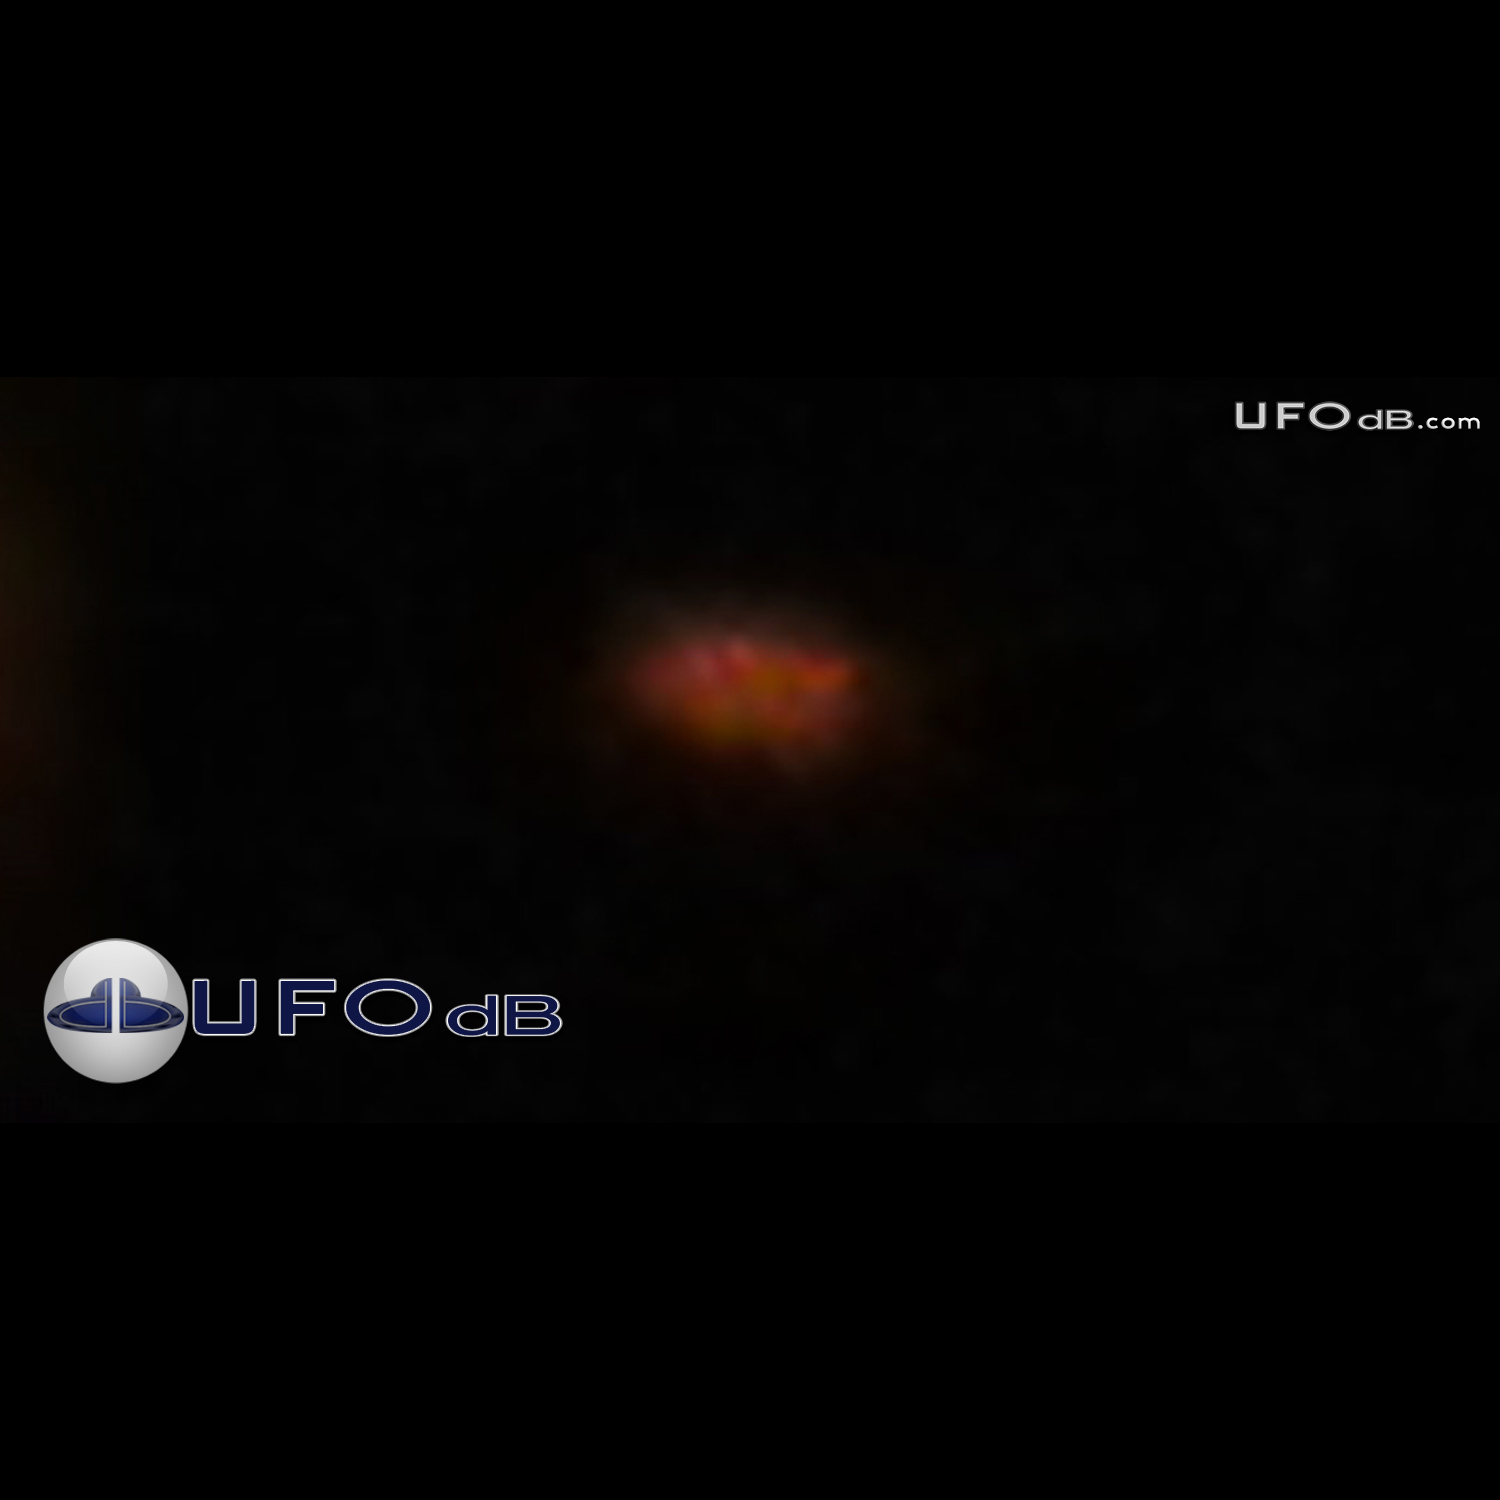 Large Red UFO over Aldershot | Hampshire, England | January 8 2011 UFO Picture #299-1